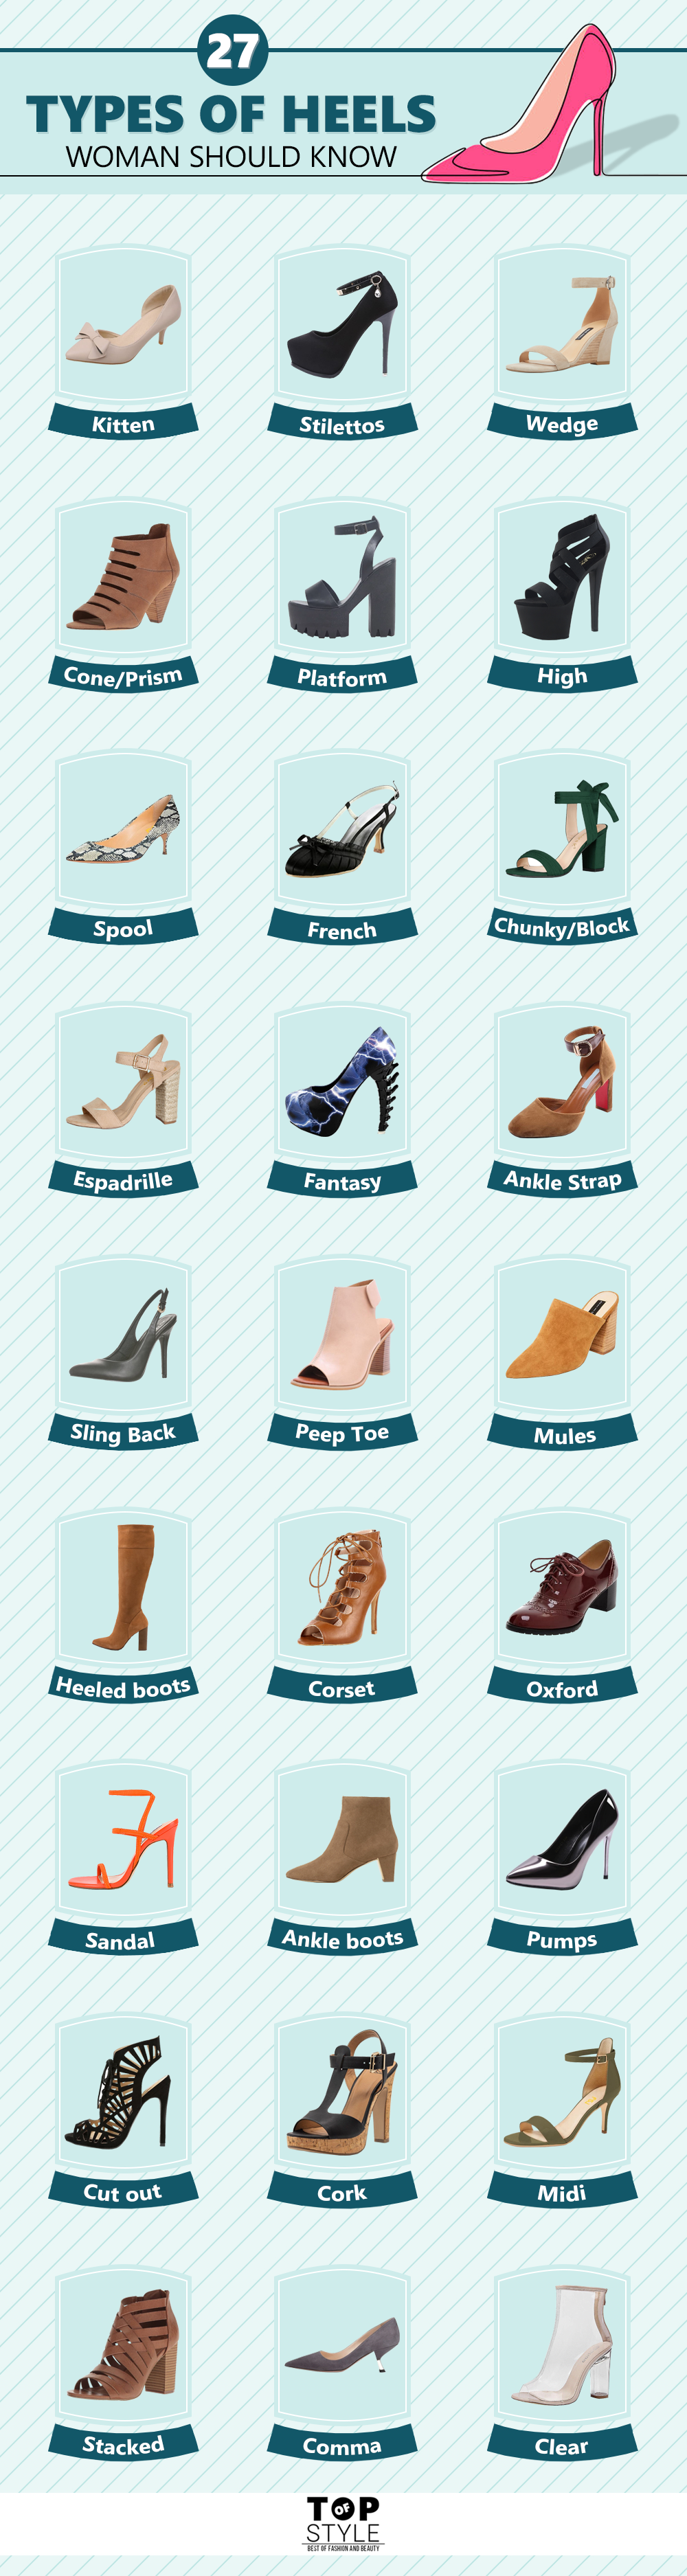 Types of Heels: Different Types of Heels with Their Names | Heels/Sandal  Guide